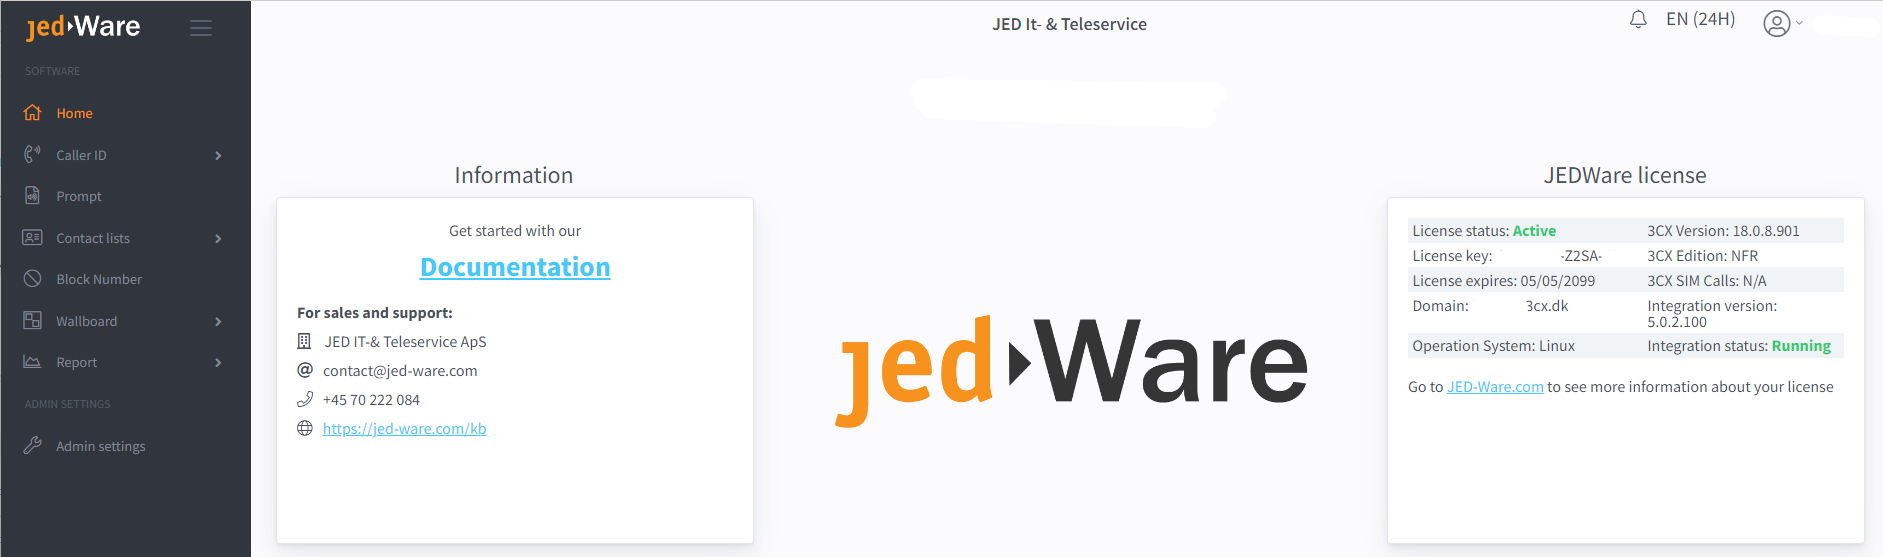 A new and error free JED-Ware installation, The JEDWare Integration is up and running, and the License key has been accepted